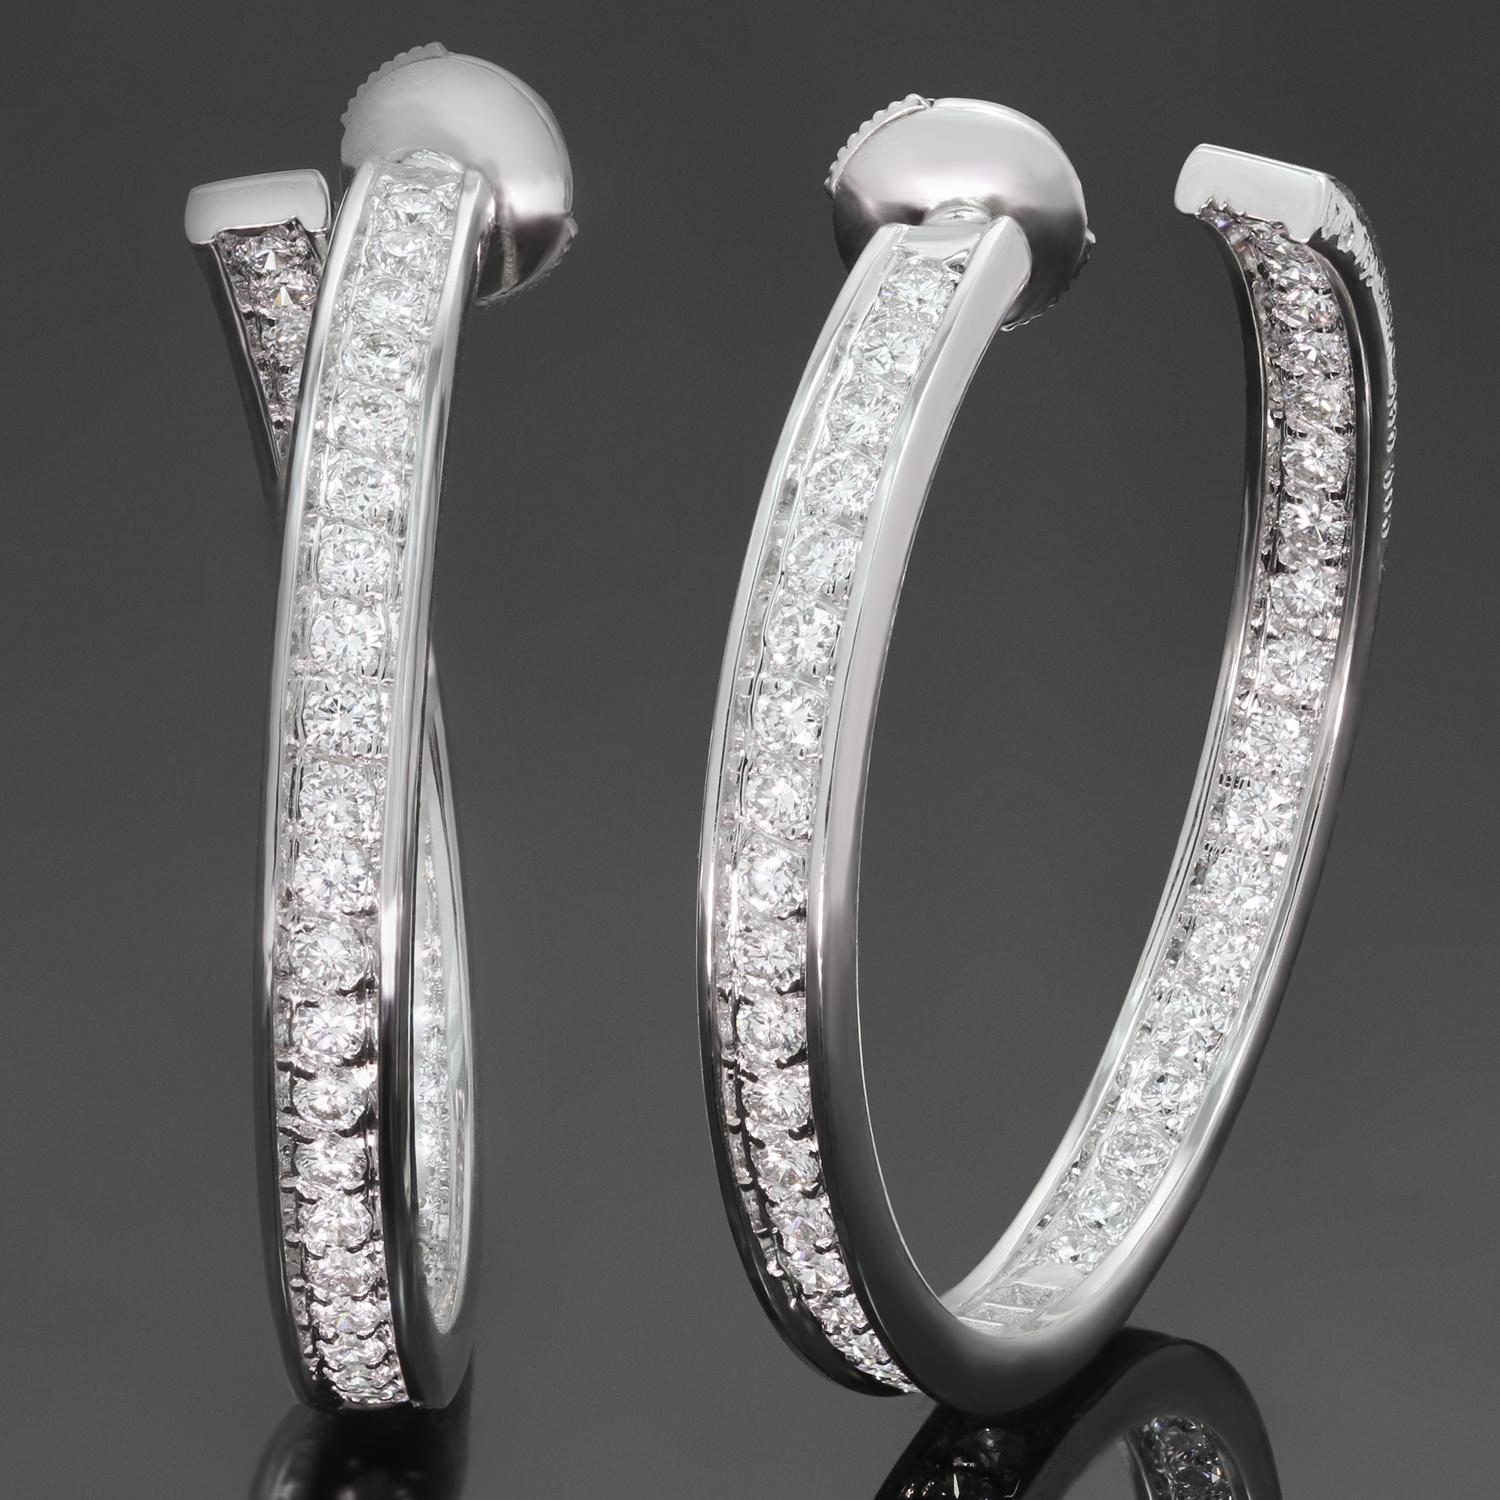 These magnificent Cartier hoop earrings feature the unique inside out design crafted in 18k white gold and set with brilliant-cut round D-F VVS1-VVS2 diamonds of an estimated 2.94 carats. Made in France circa 2000s. Measurements: 1.37